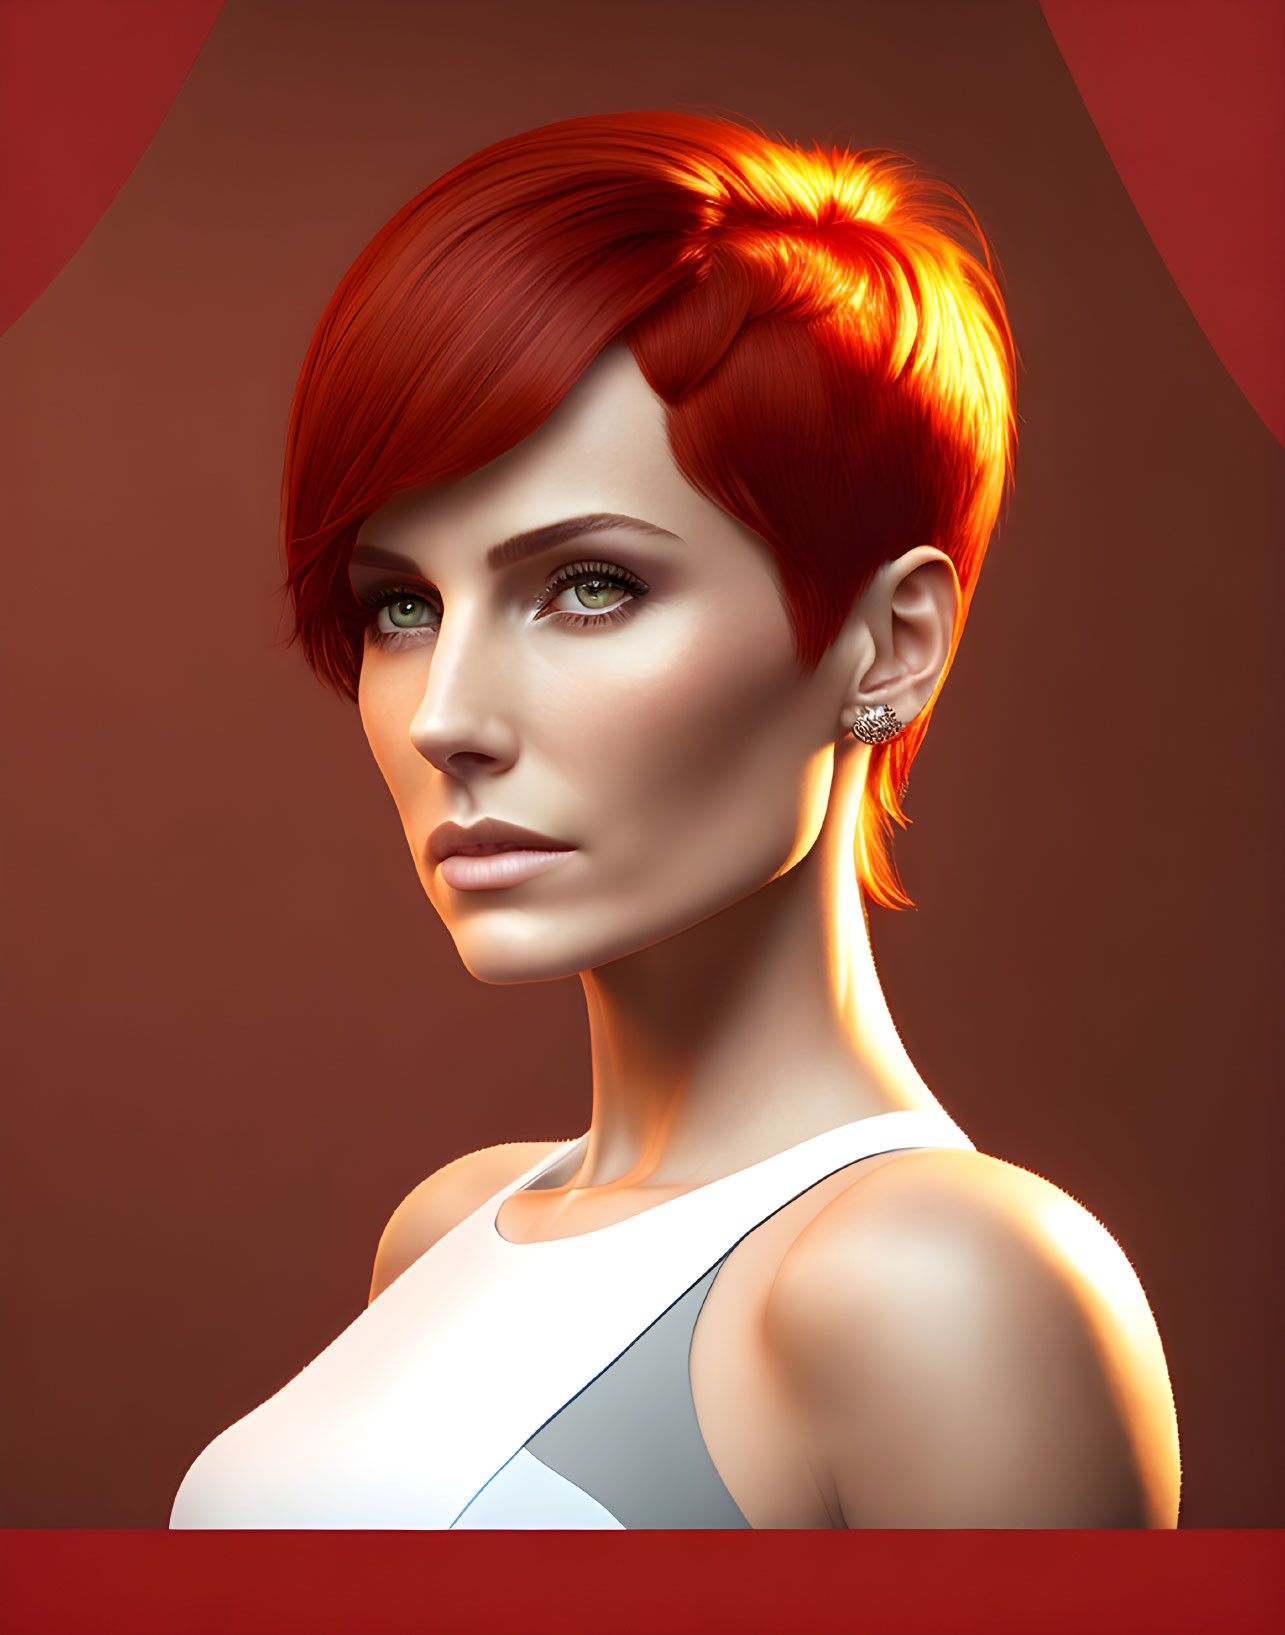 Vibrant red hair woman in sleek pixie cut with striking makeup